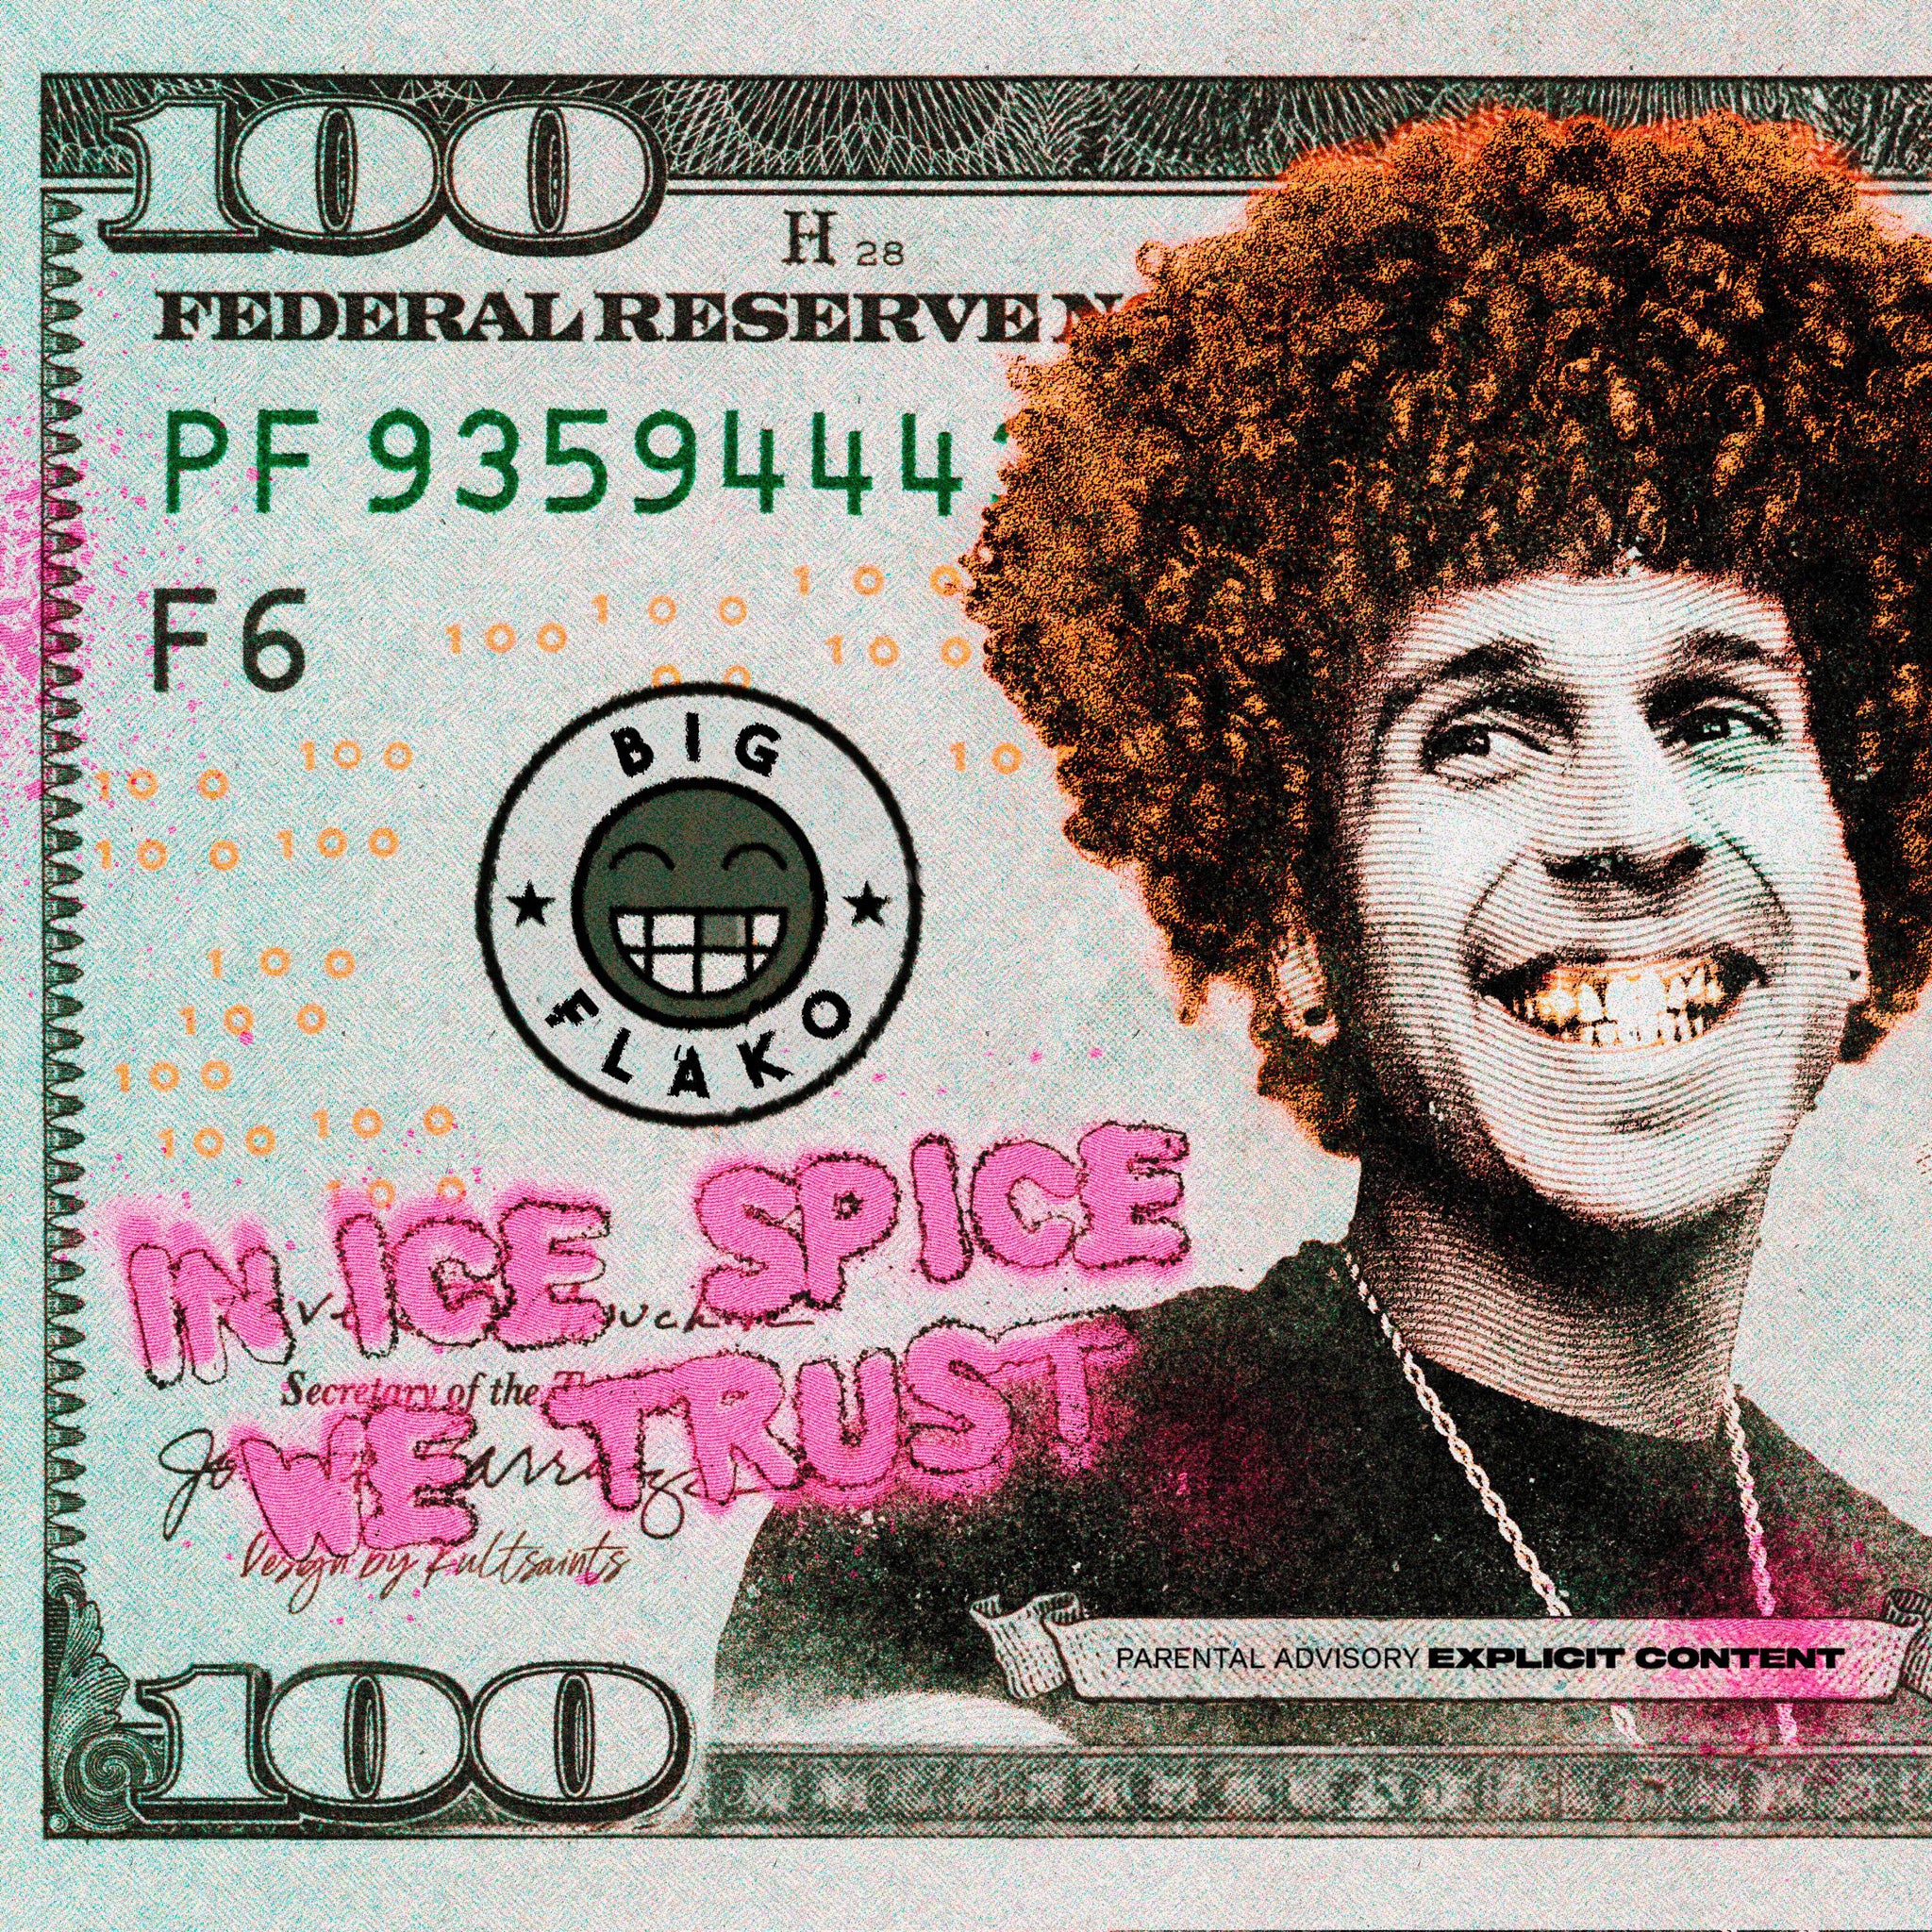 In Ice Spice We Trust by BIG FLAKO